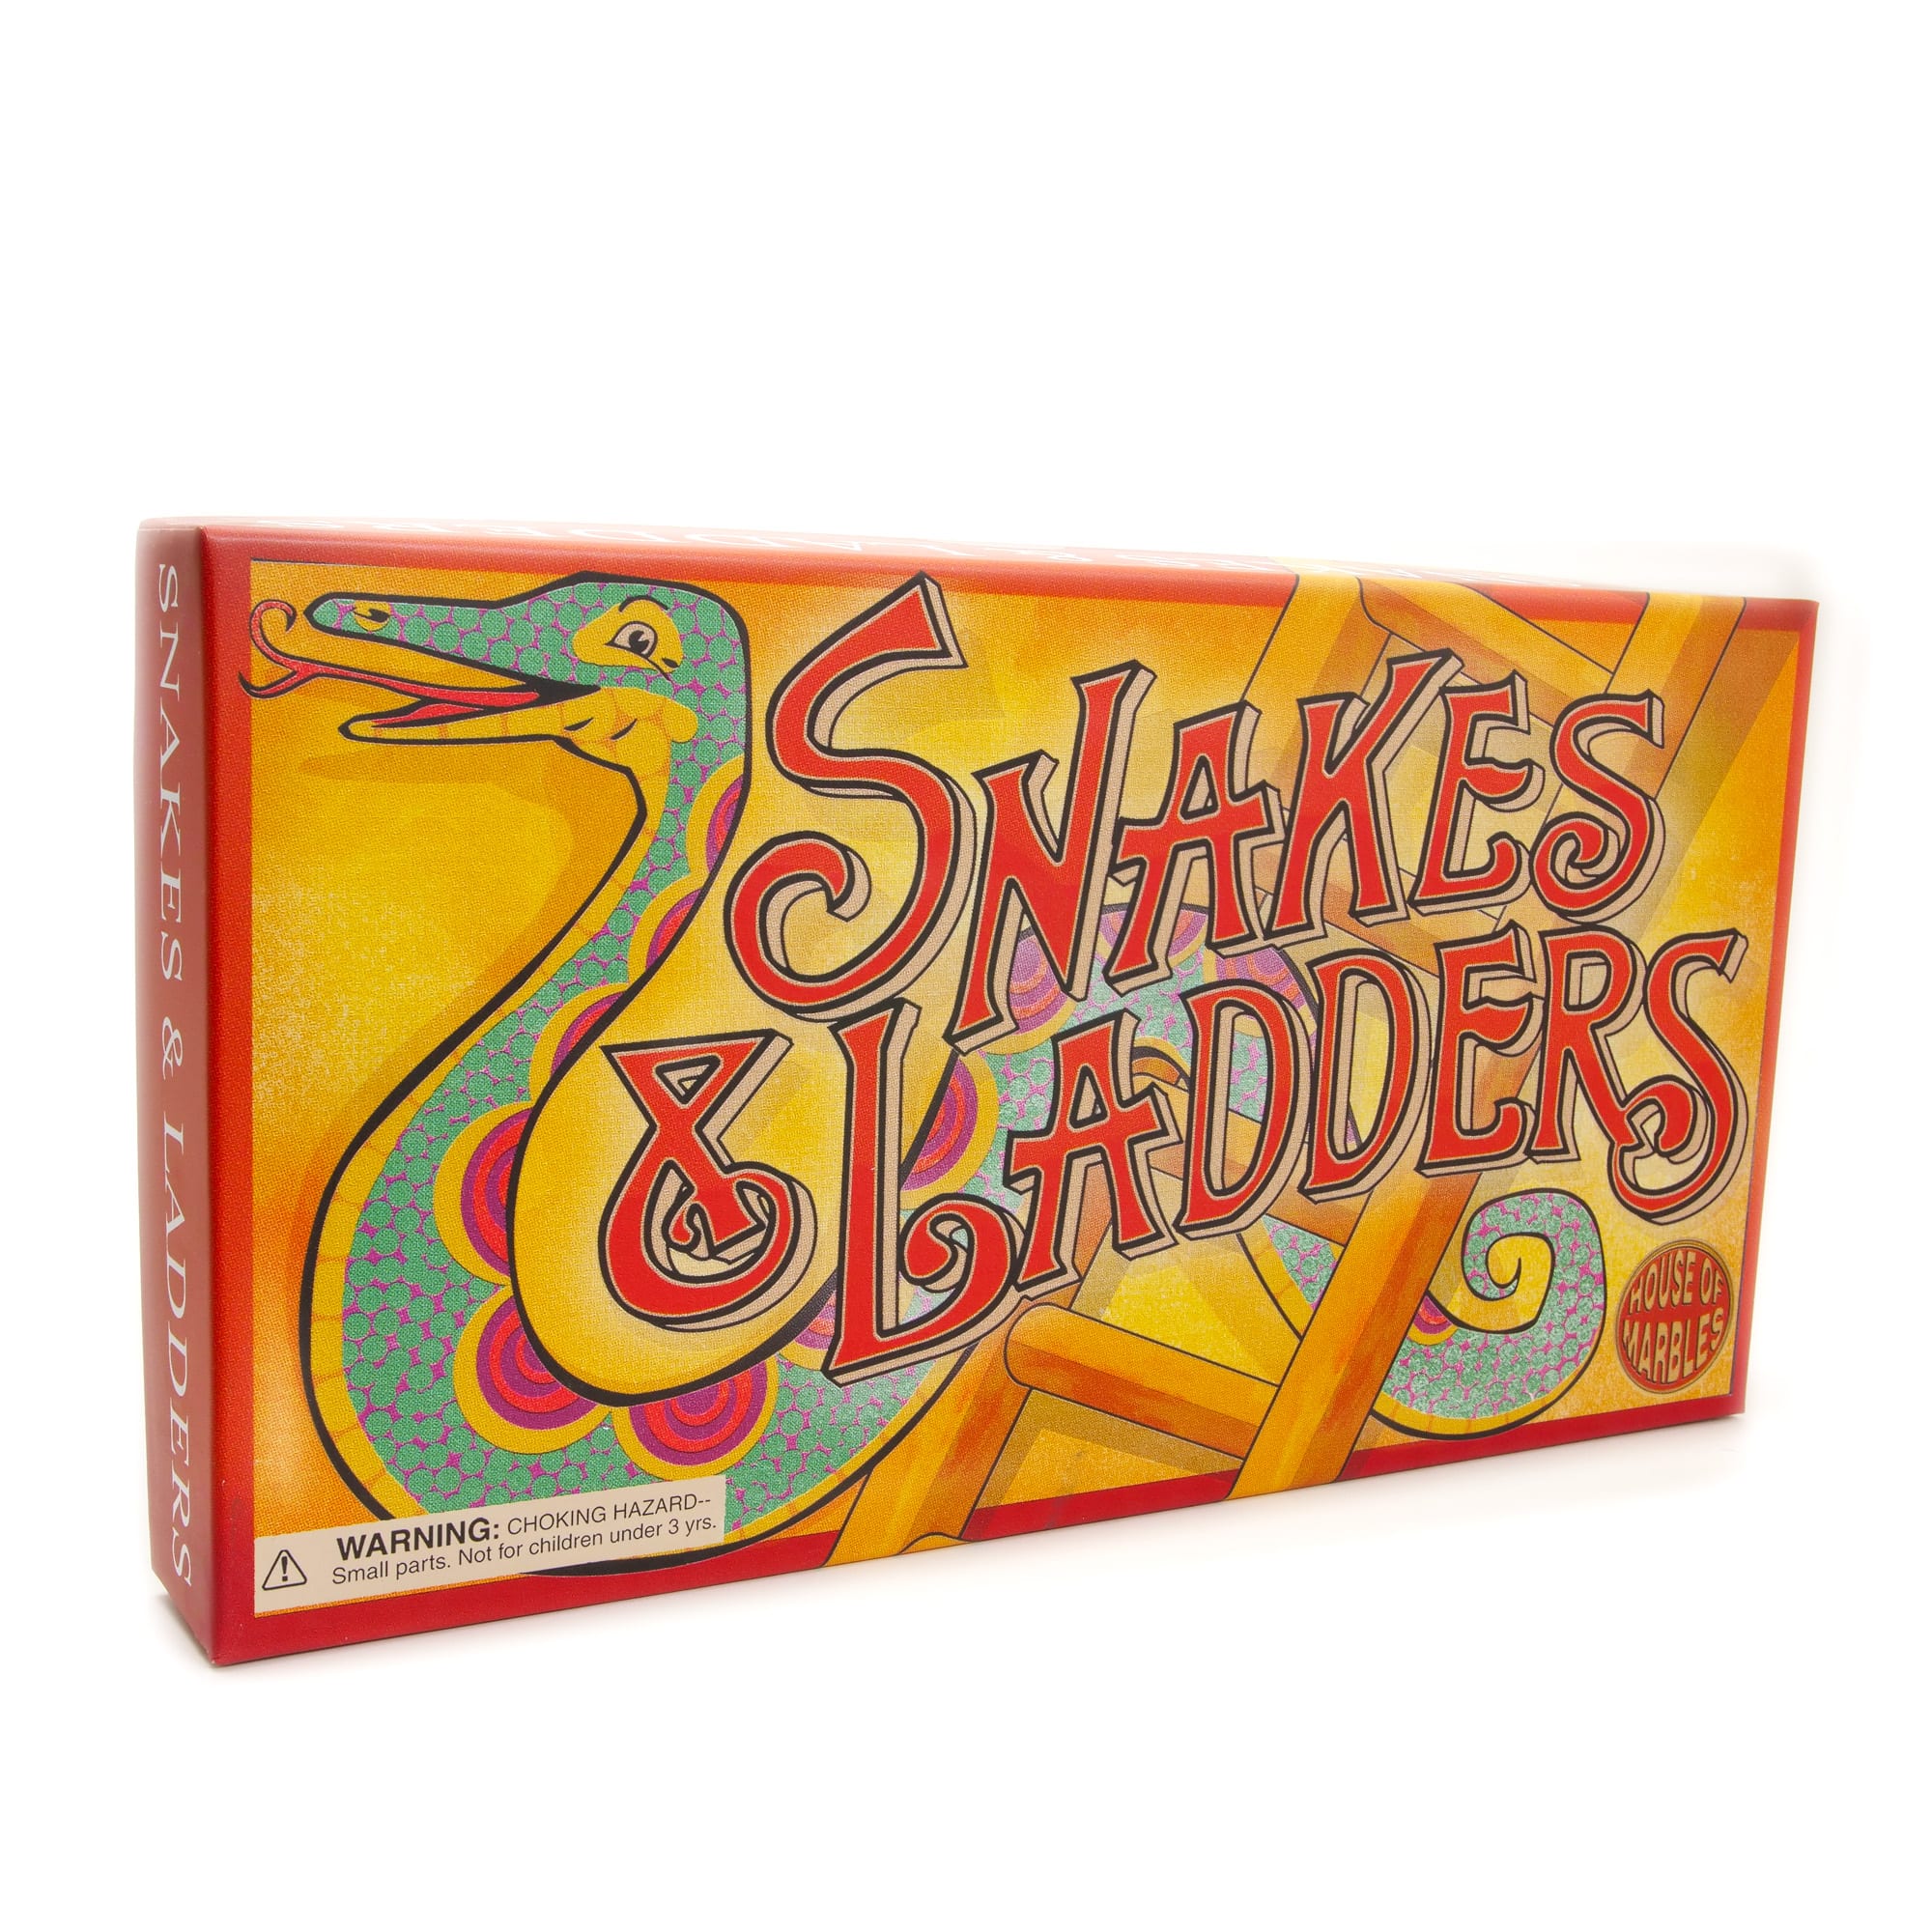 VINTAGE RETRO RIDLEYS FAMILY SNAKES AND LADDERS CLASSIC BOARD GAME NEW AND BOXED 